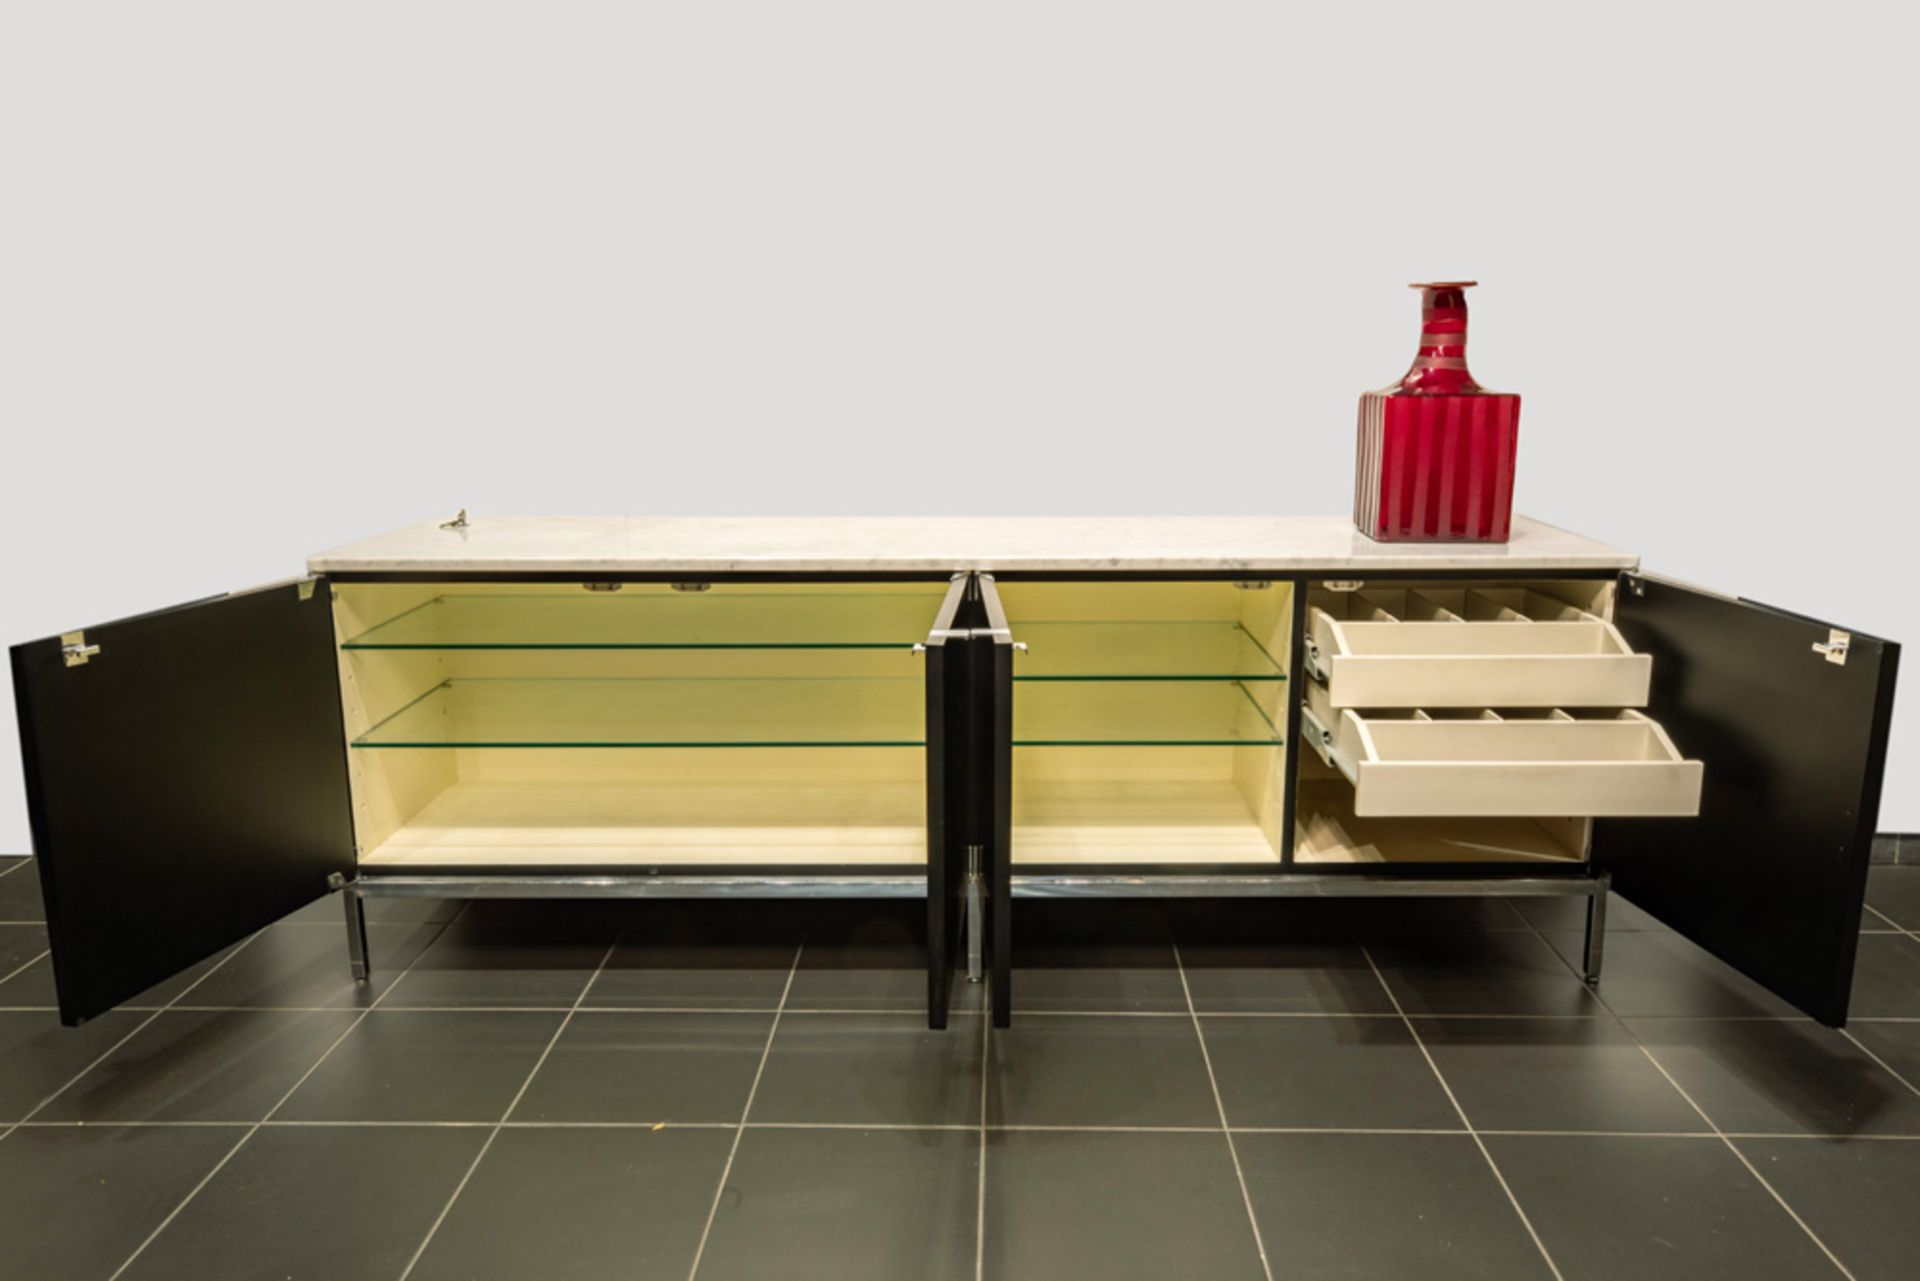 sixties' Florence Knoll design (n° 118 dd 1961) "Knoll International" marked "Credenza" sideboard in - Bild 2 aus 4